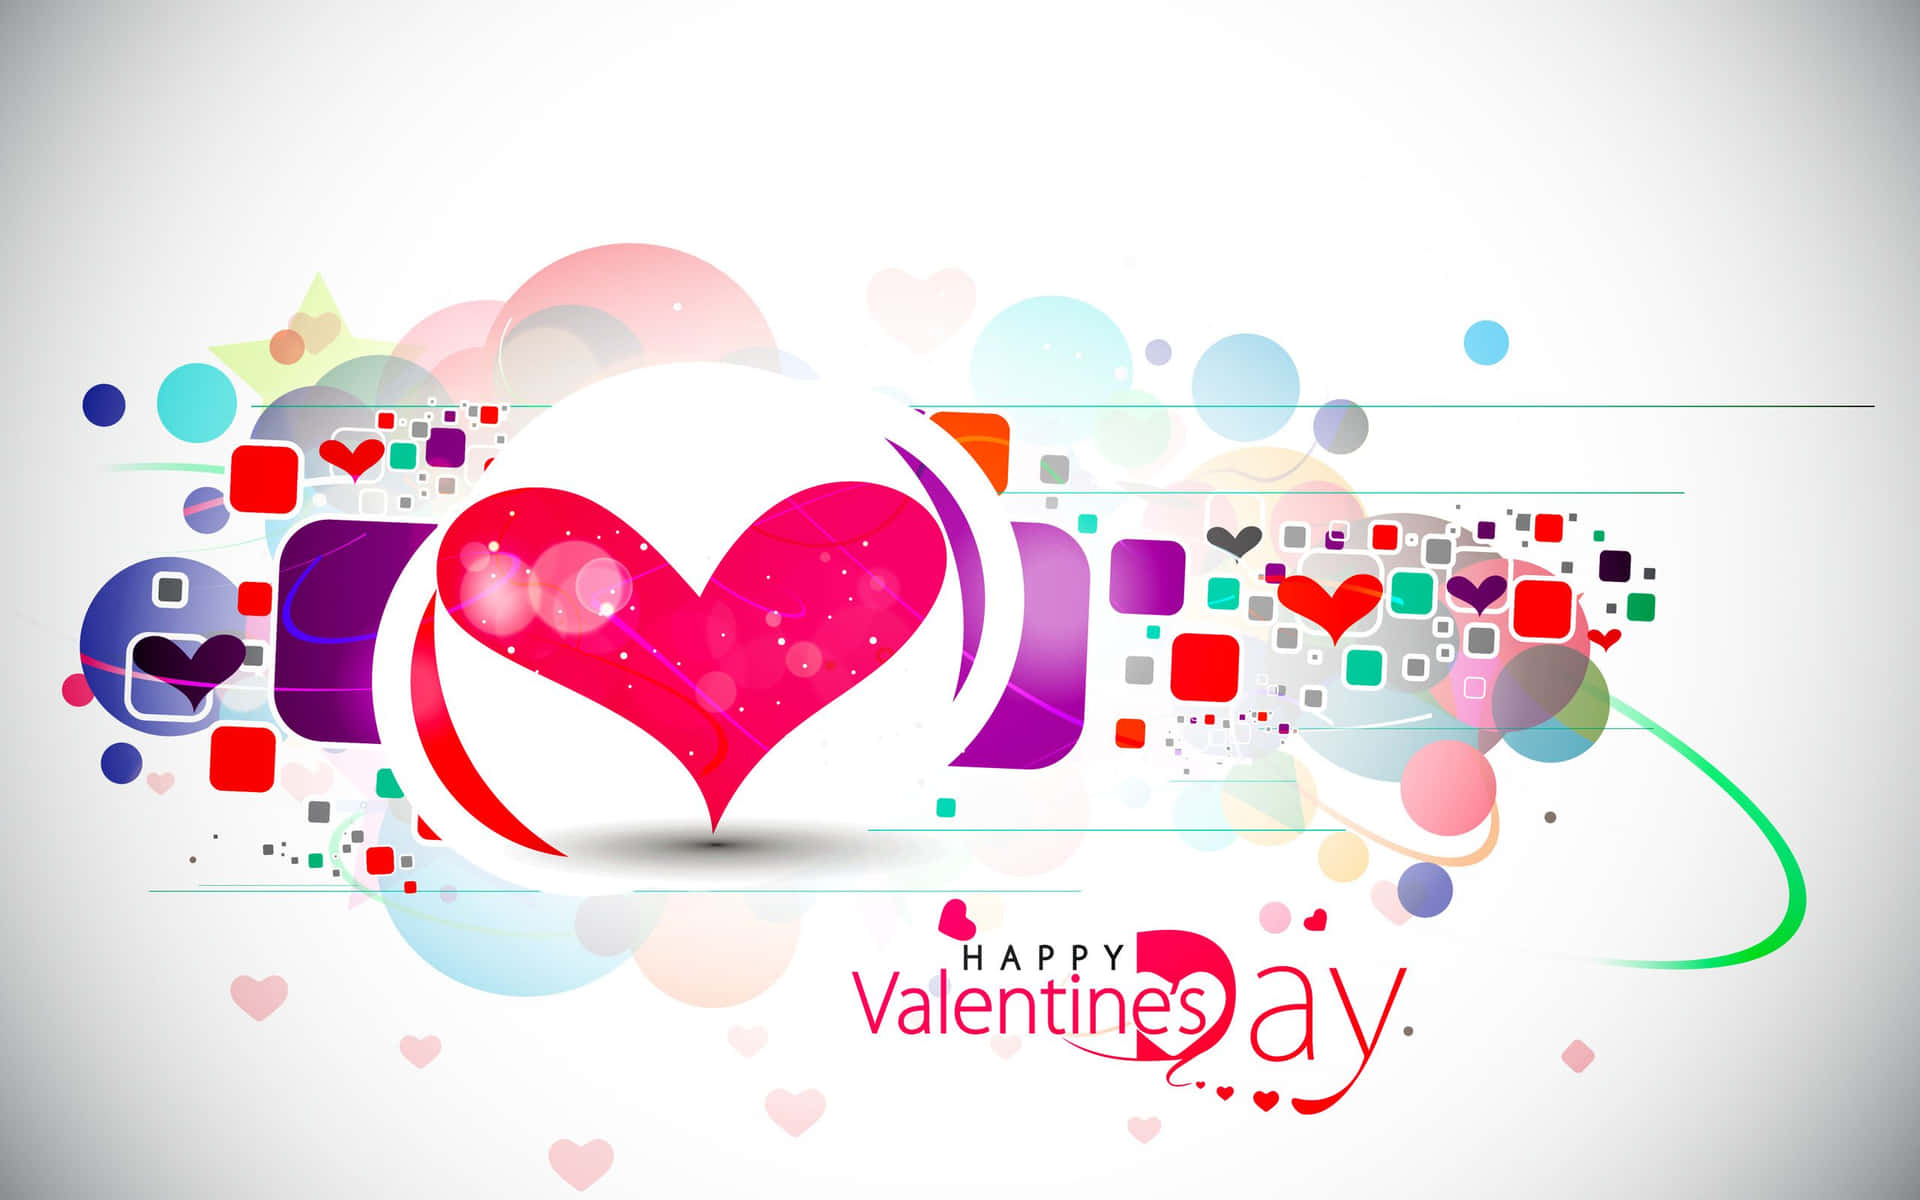 Valentine Day Wallpapers With Hearts And Colorful Shapes